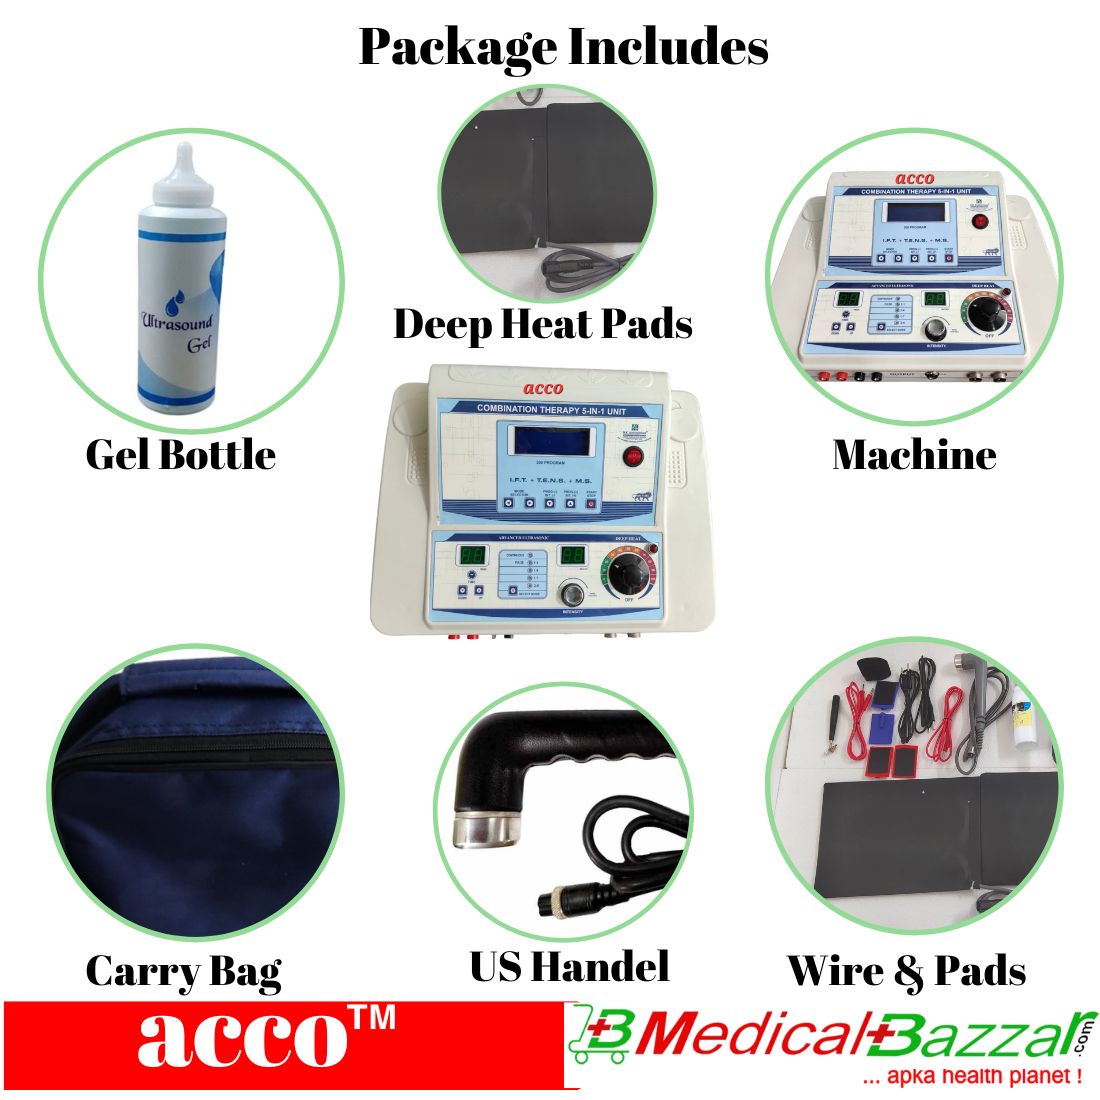 acco Advance 5in1 COMBO (IFT+MS+TENS+US) with Deep Heat Therapy Unit